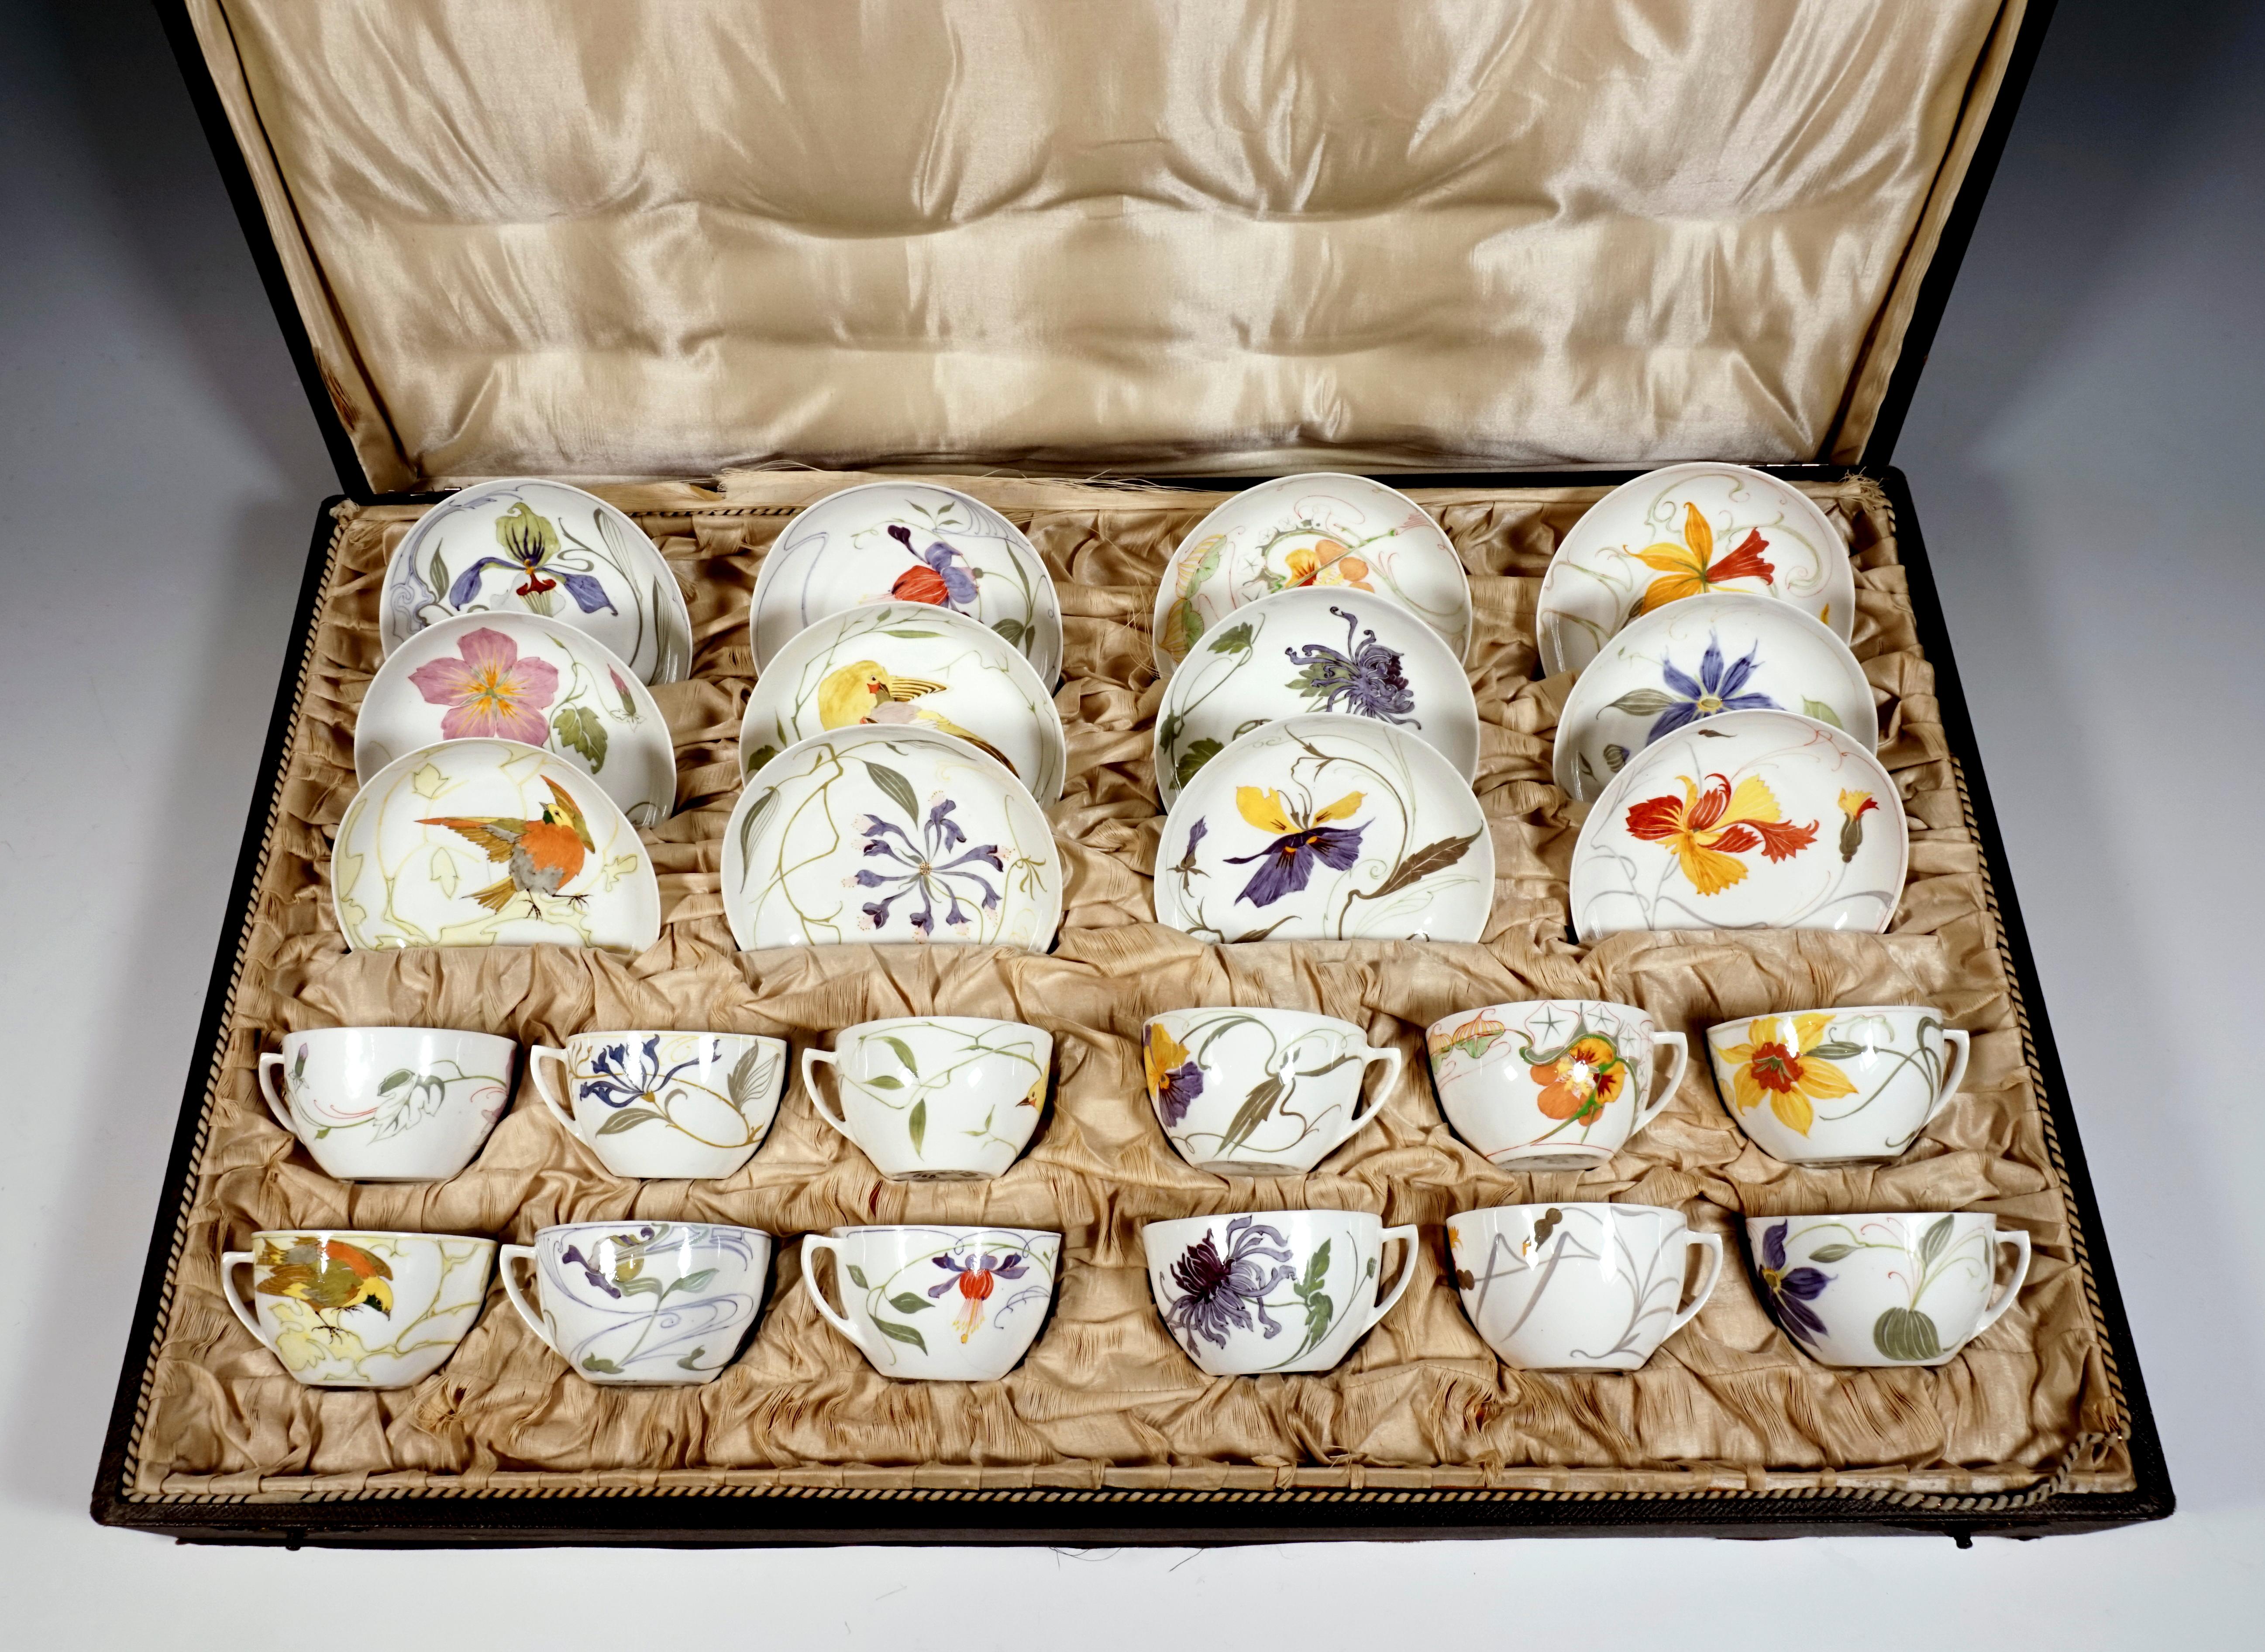 Twelve cups with saucers made of the finest eggshell porcelain, whitish shards, colored decor with an exceptionally large spectrum of floral motifs and birds in the Art Nouveau style, in the original case.

Manufactory Rozenburg
Founded in